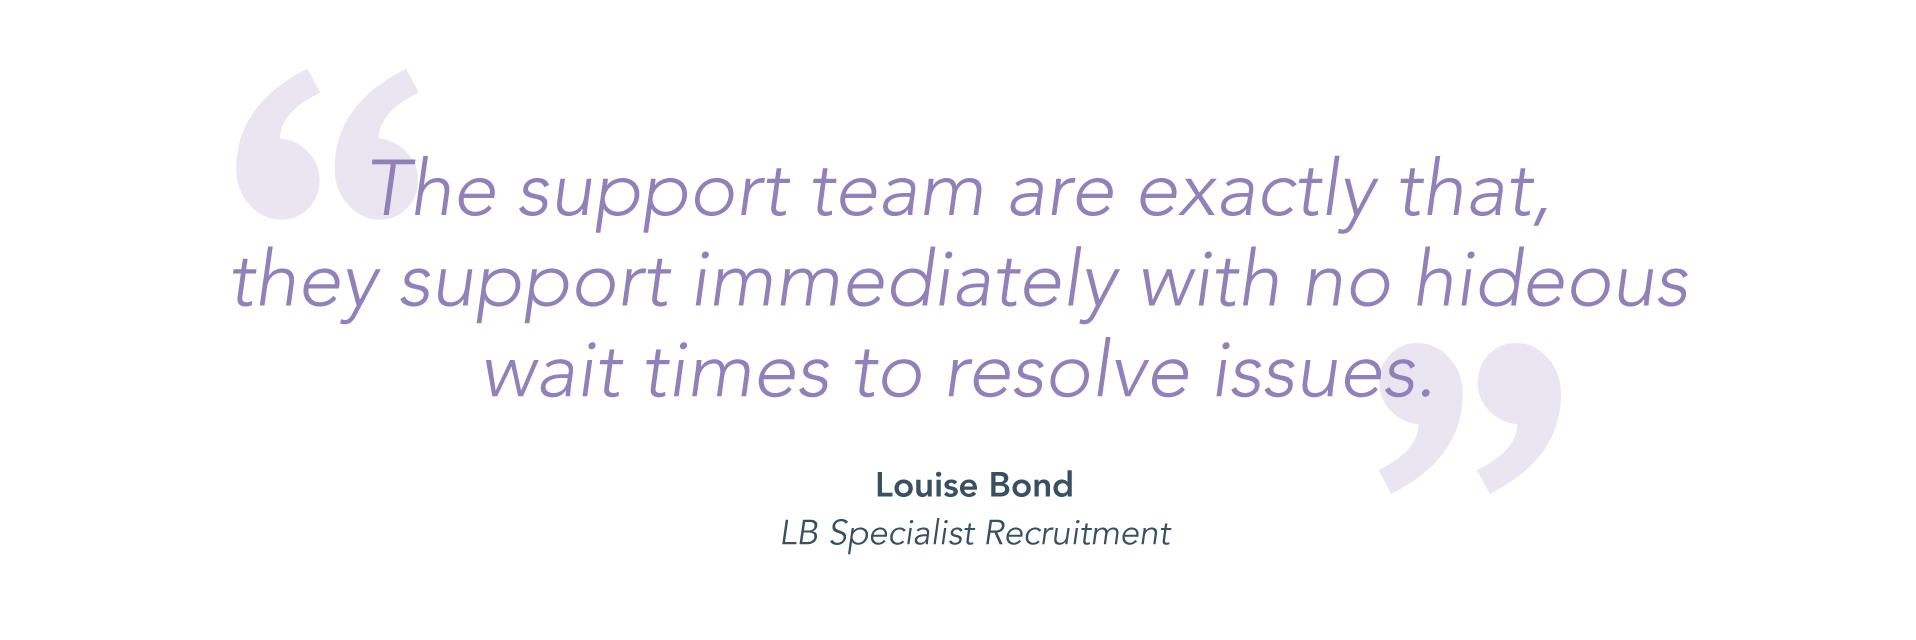 "The support team are exactly that, they support immediately with no hideous wait times to resolve issues." - Louise Bond, LB Specialist Recruitment.